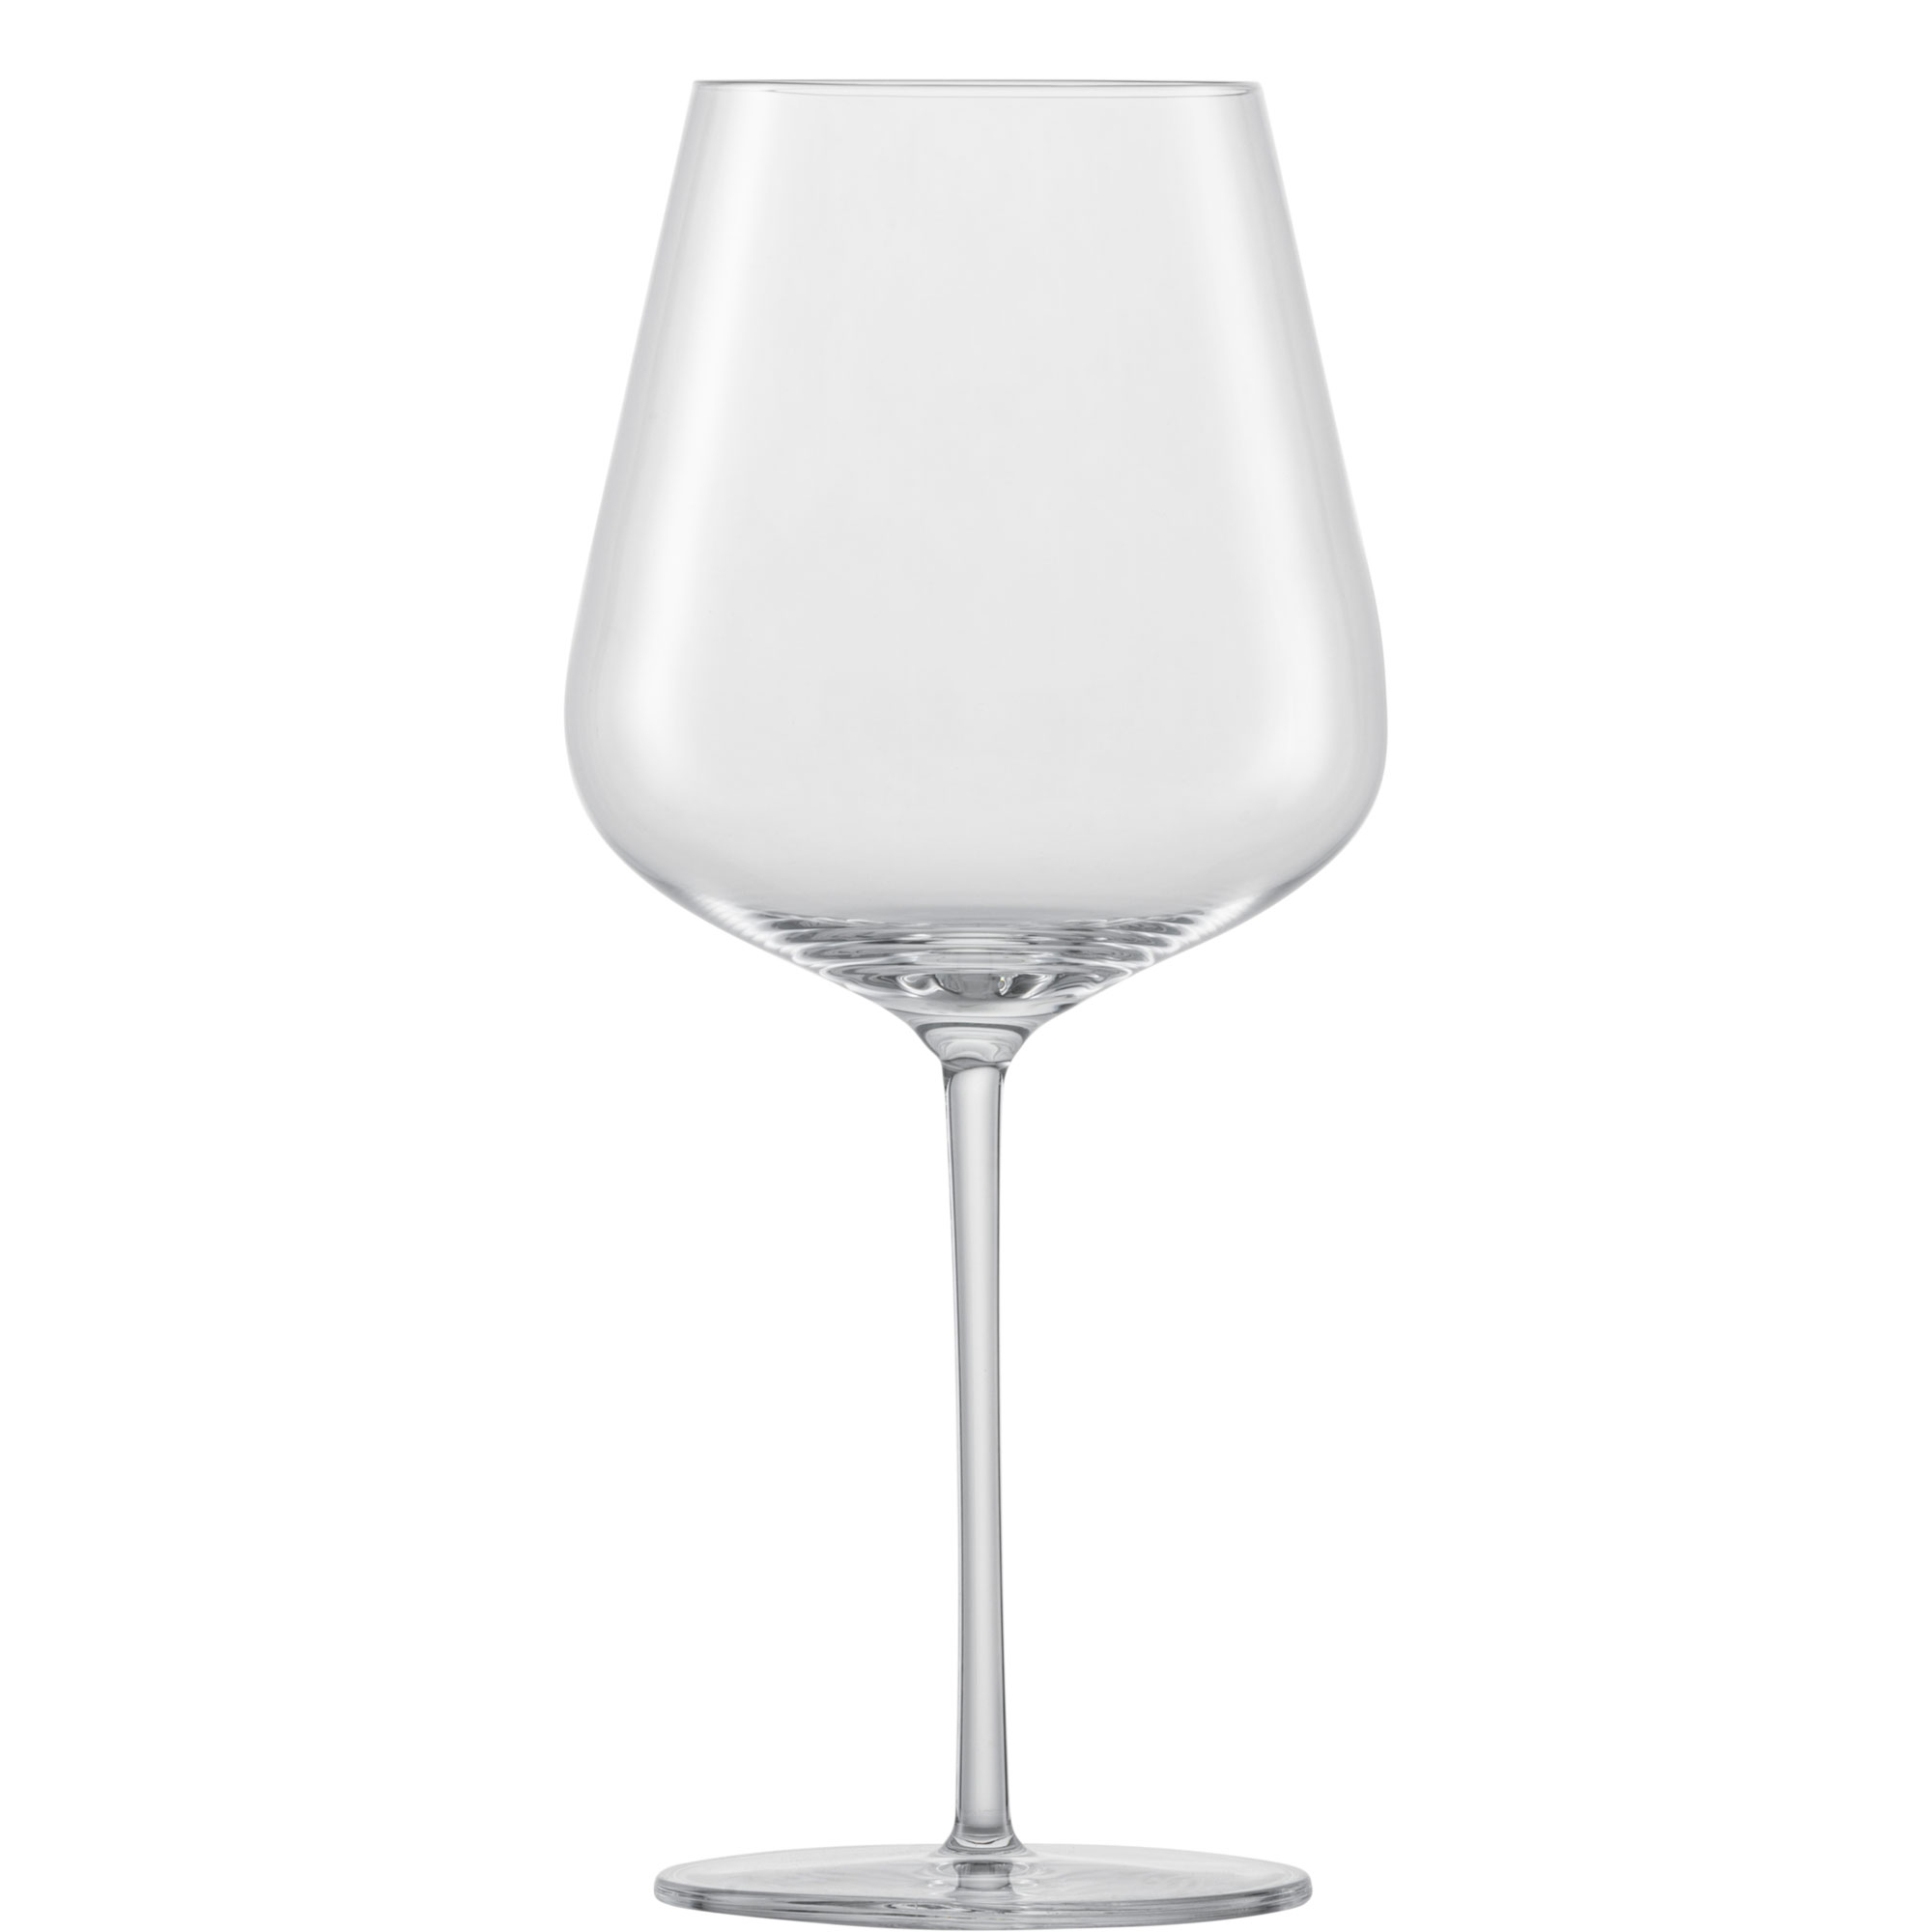 All-round red wine glass Verbelle, Zwiesel Glas - 685ml (1 pc.)